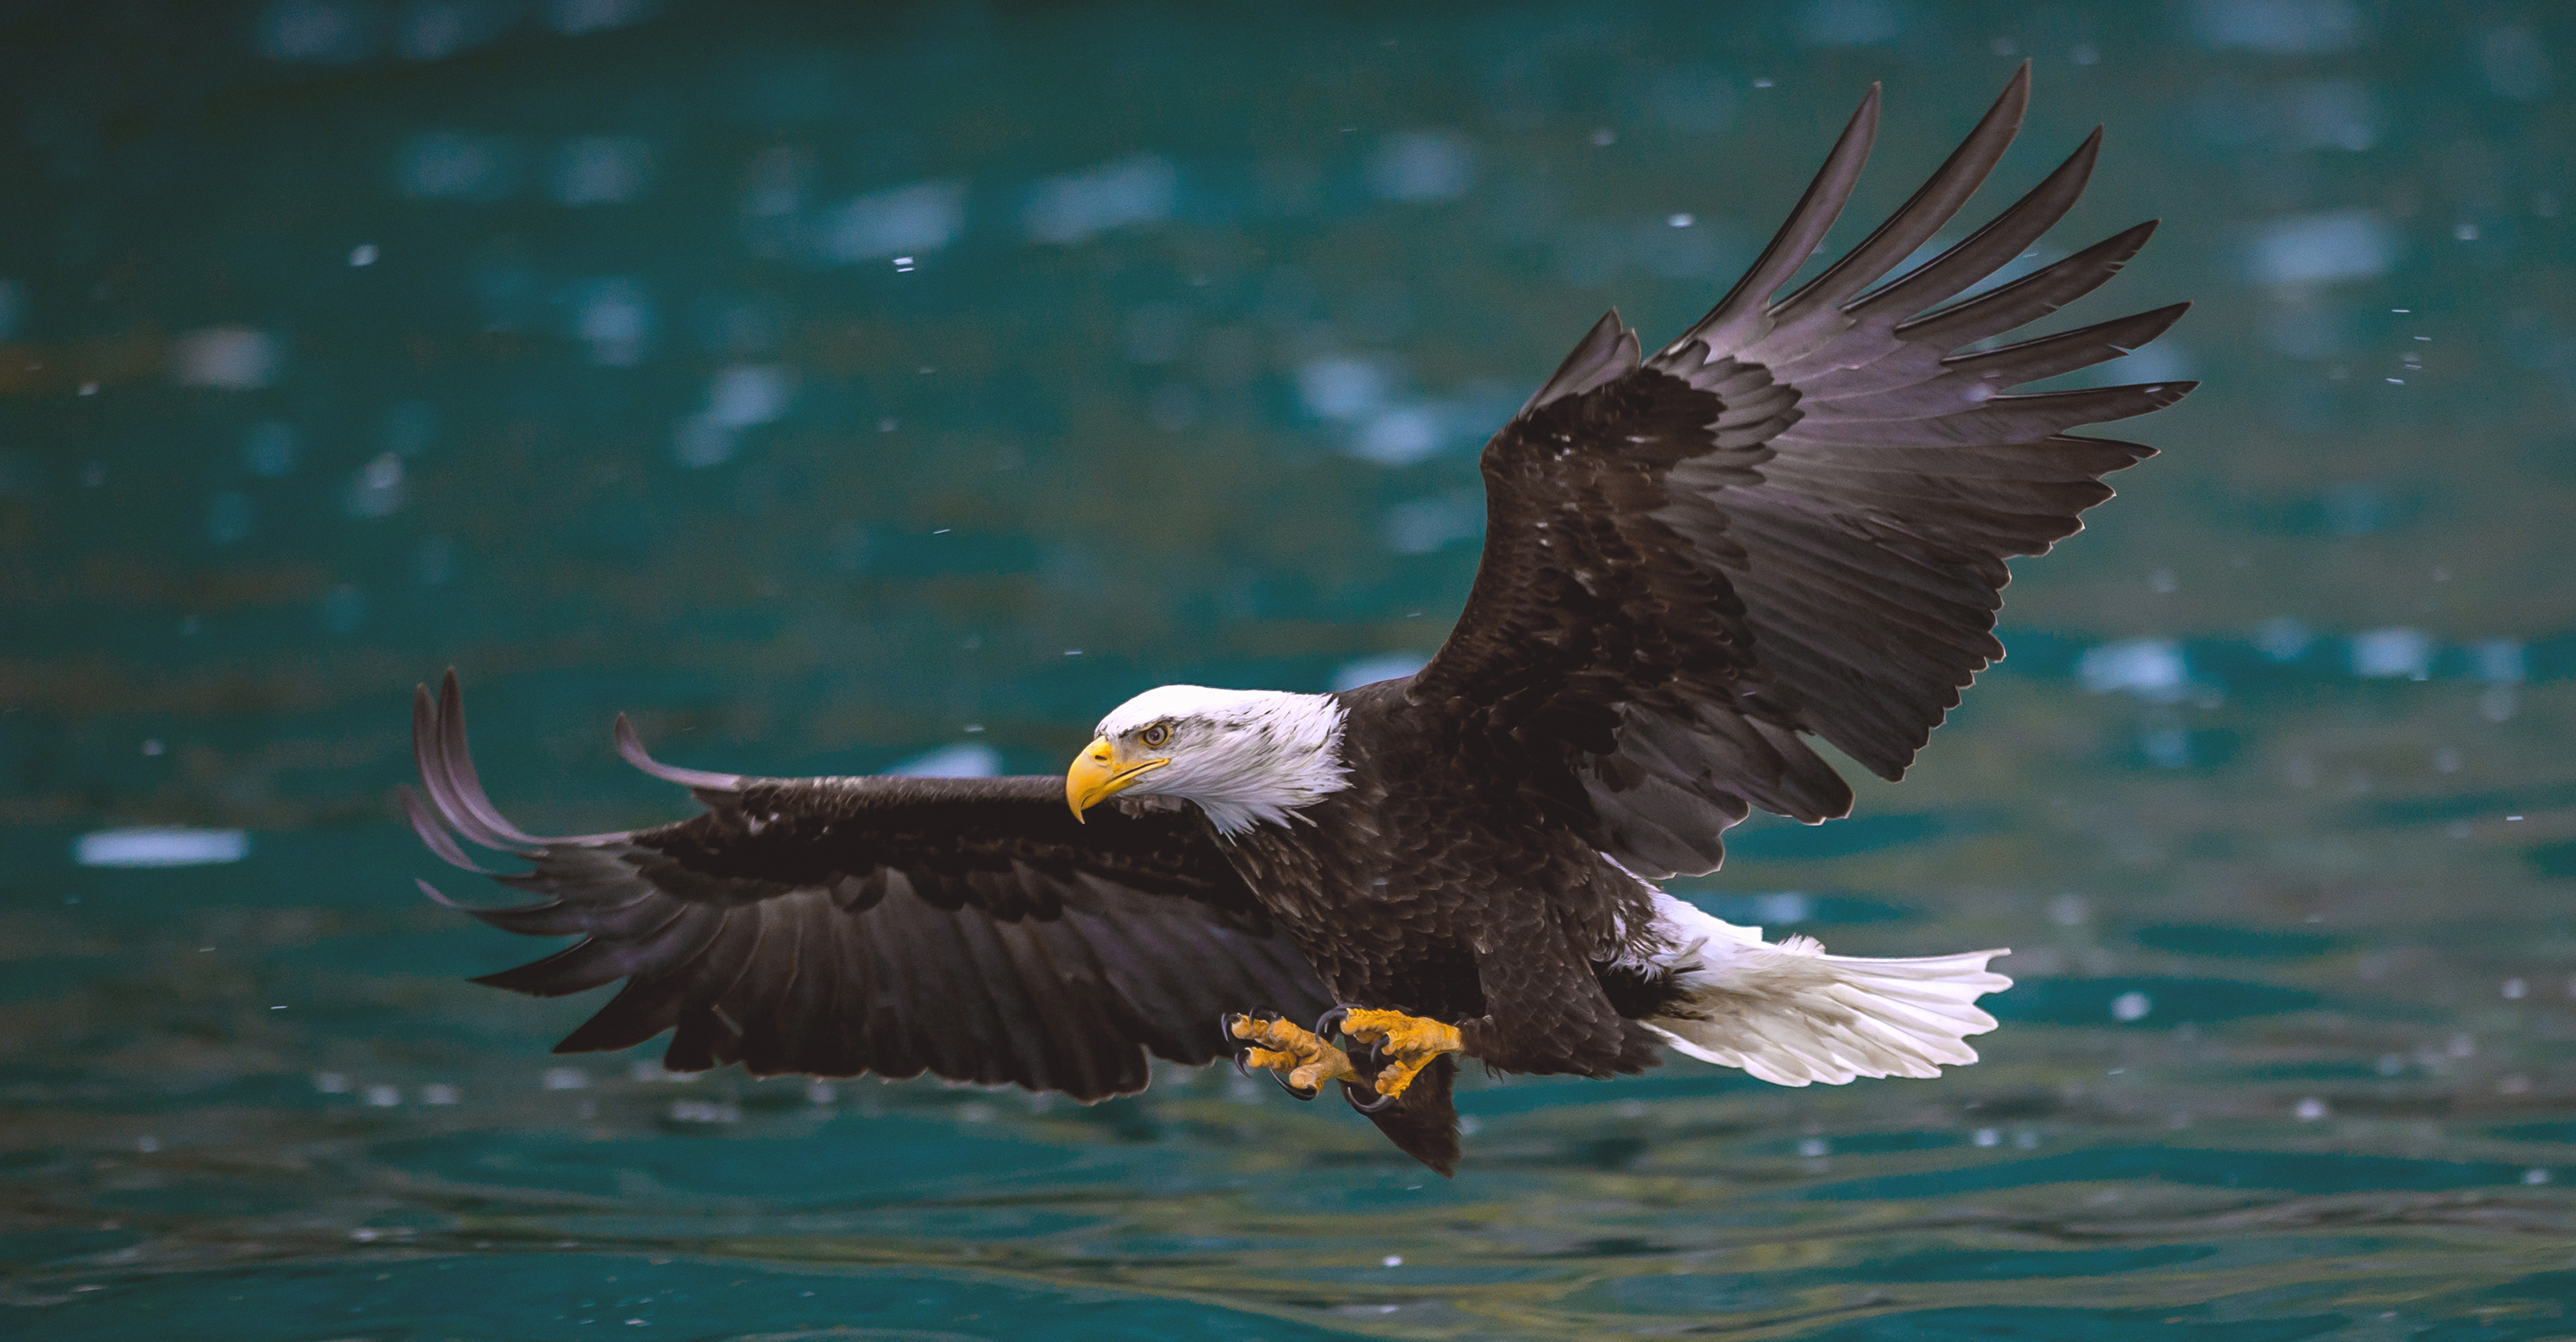 A blad eagle flies over the water to catch a fish in the Kenai region of Alaska, USA